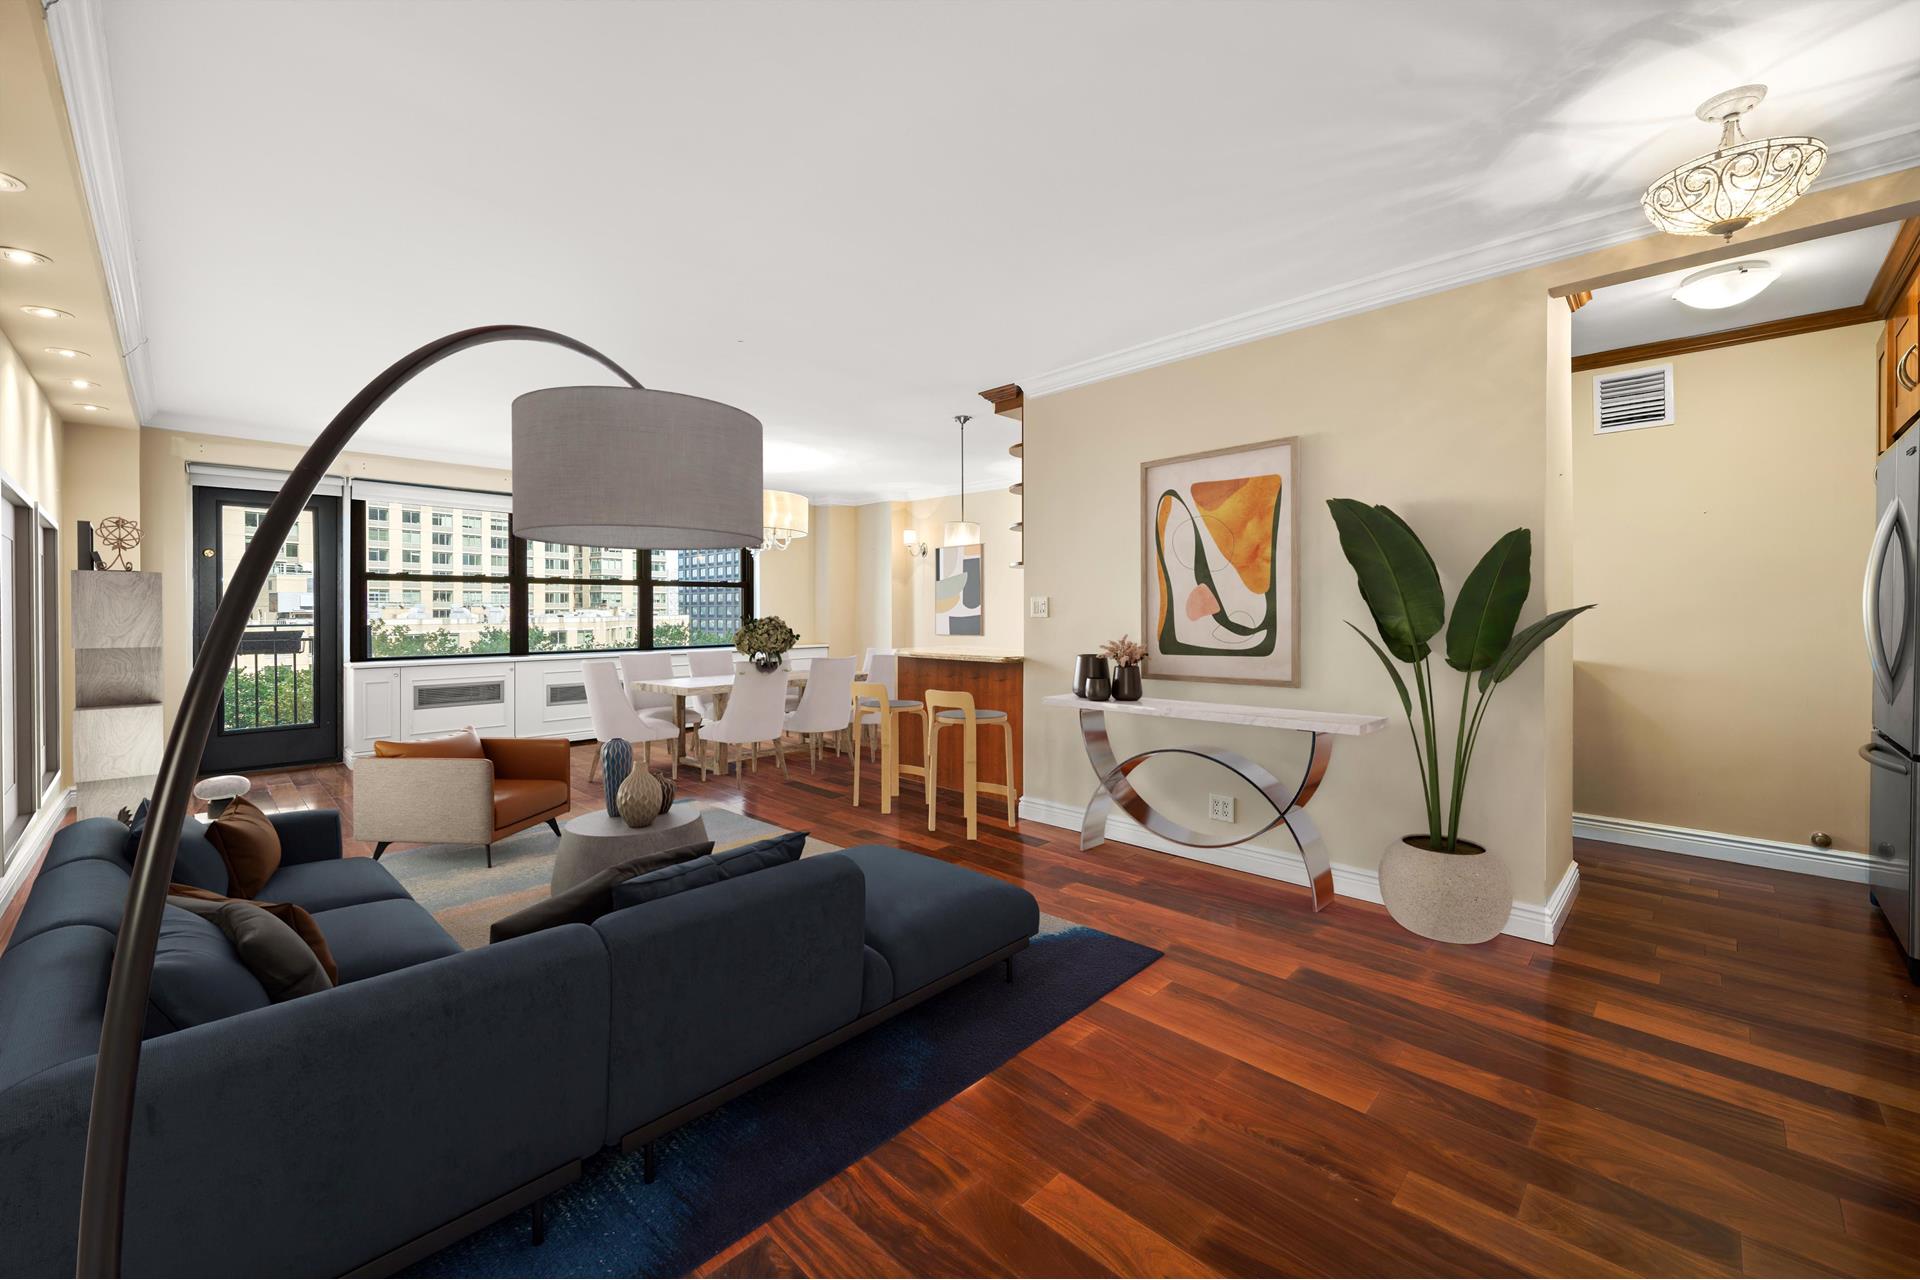 165 West End Avenue 7N, Lincoln Sq, Upper West Side, NYC - 2 Bedrooms  
2 Bathrooms  
5 Rooms - 